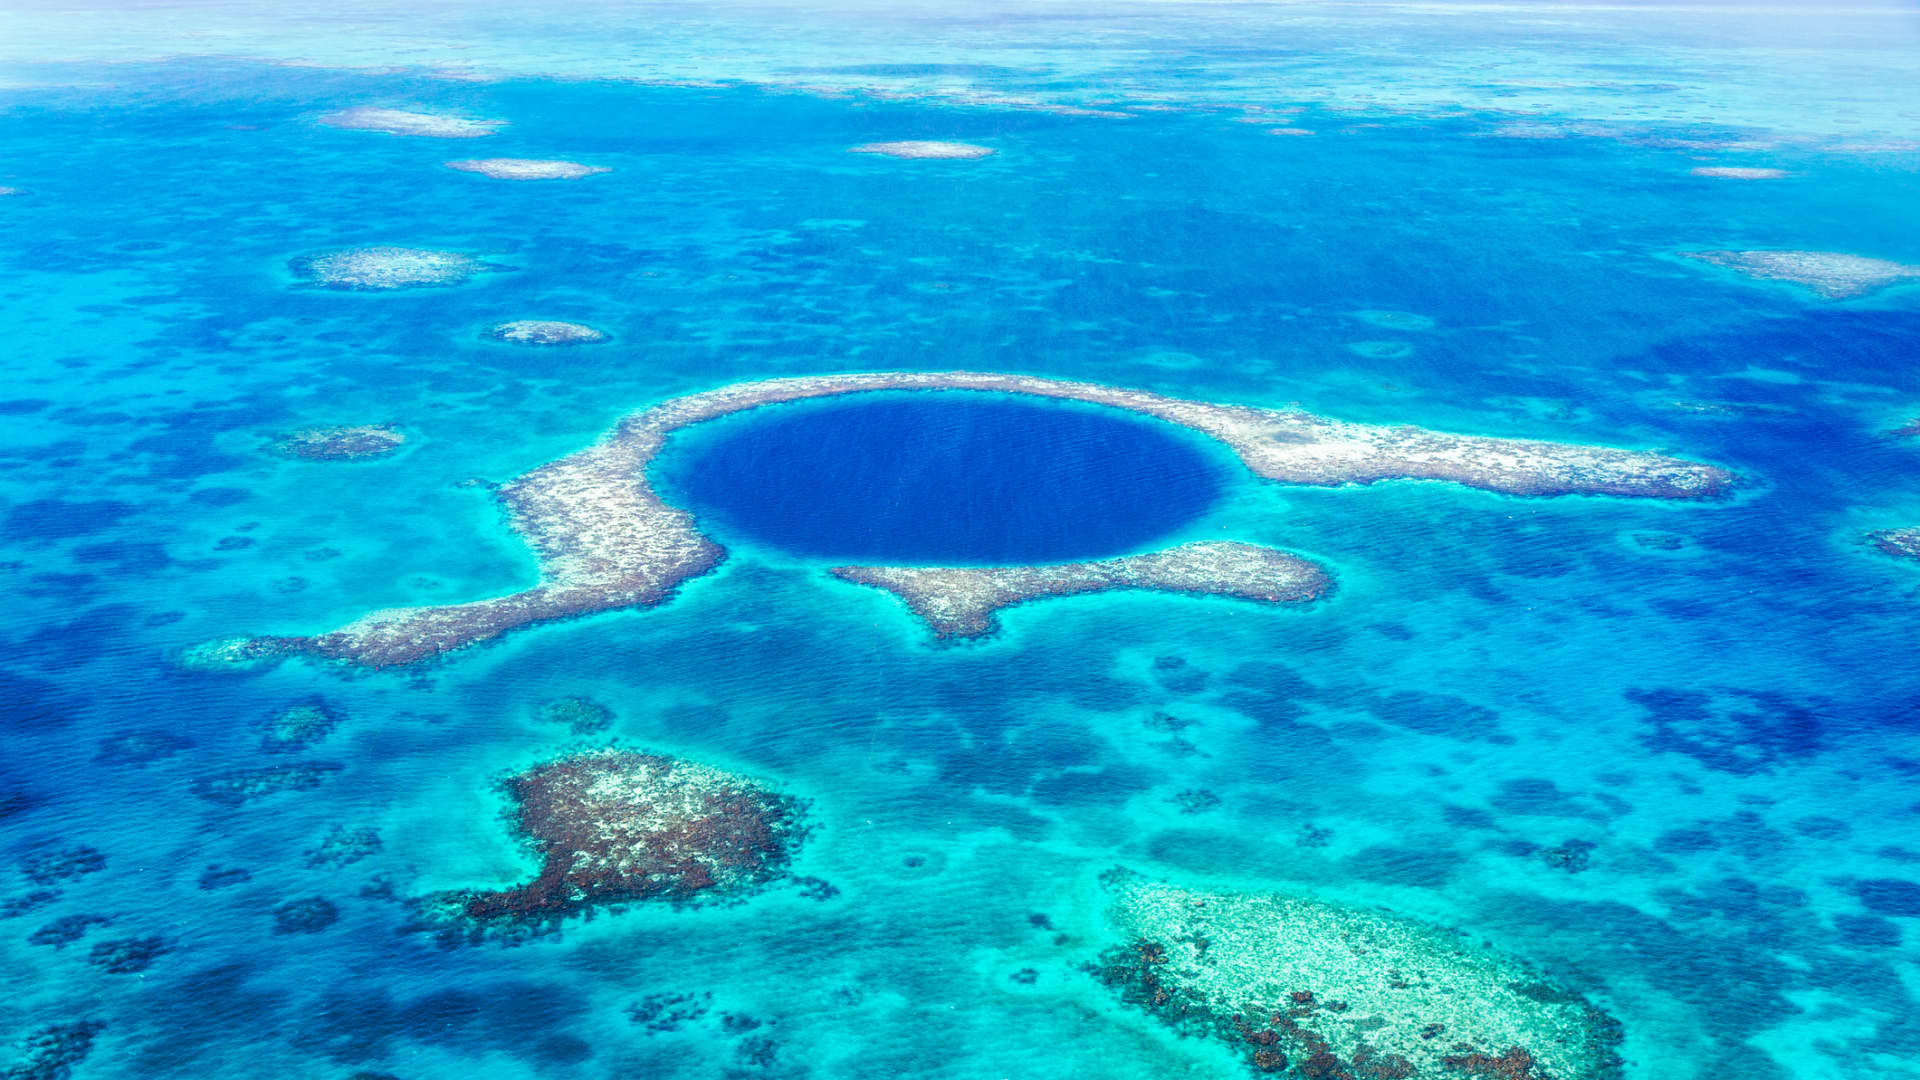 Belize's new insurance requirement for visitors begins Feb. 15, 2022. Pictured, the Blue Hole at Lighthouse Reef.